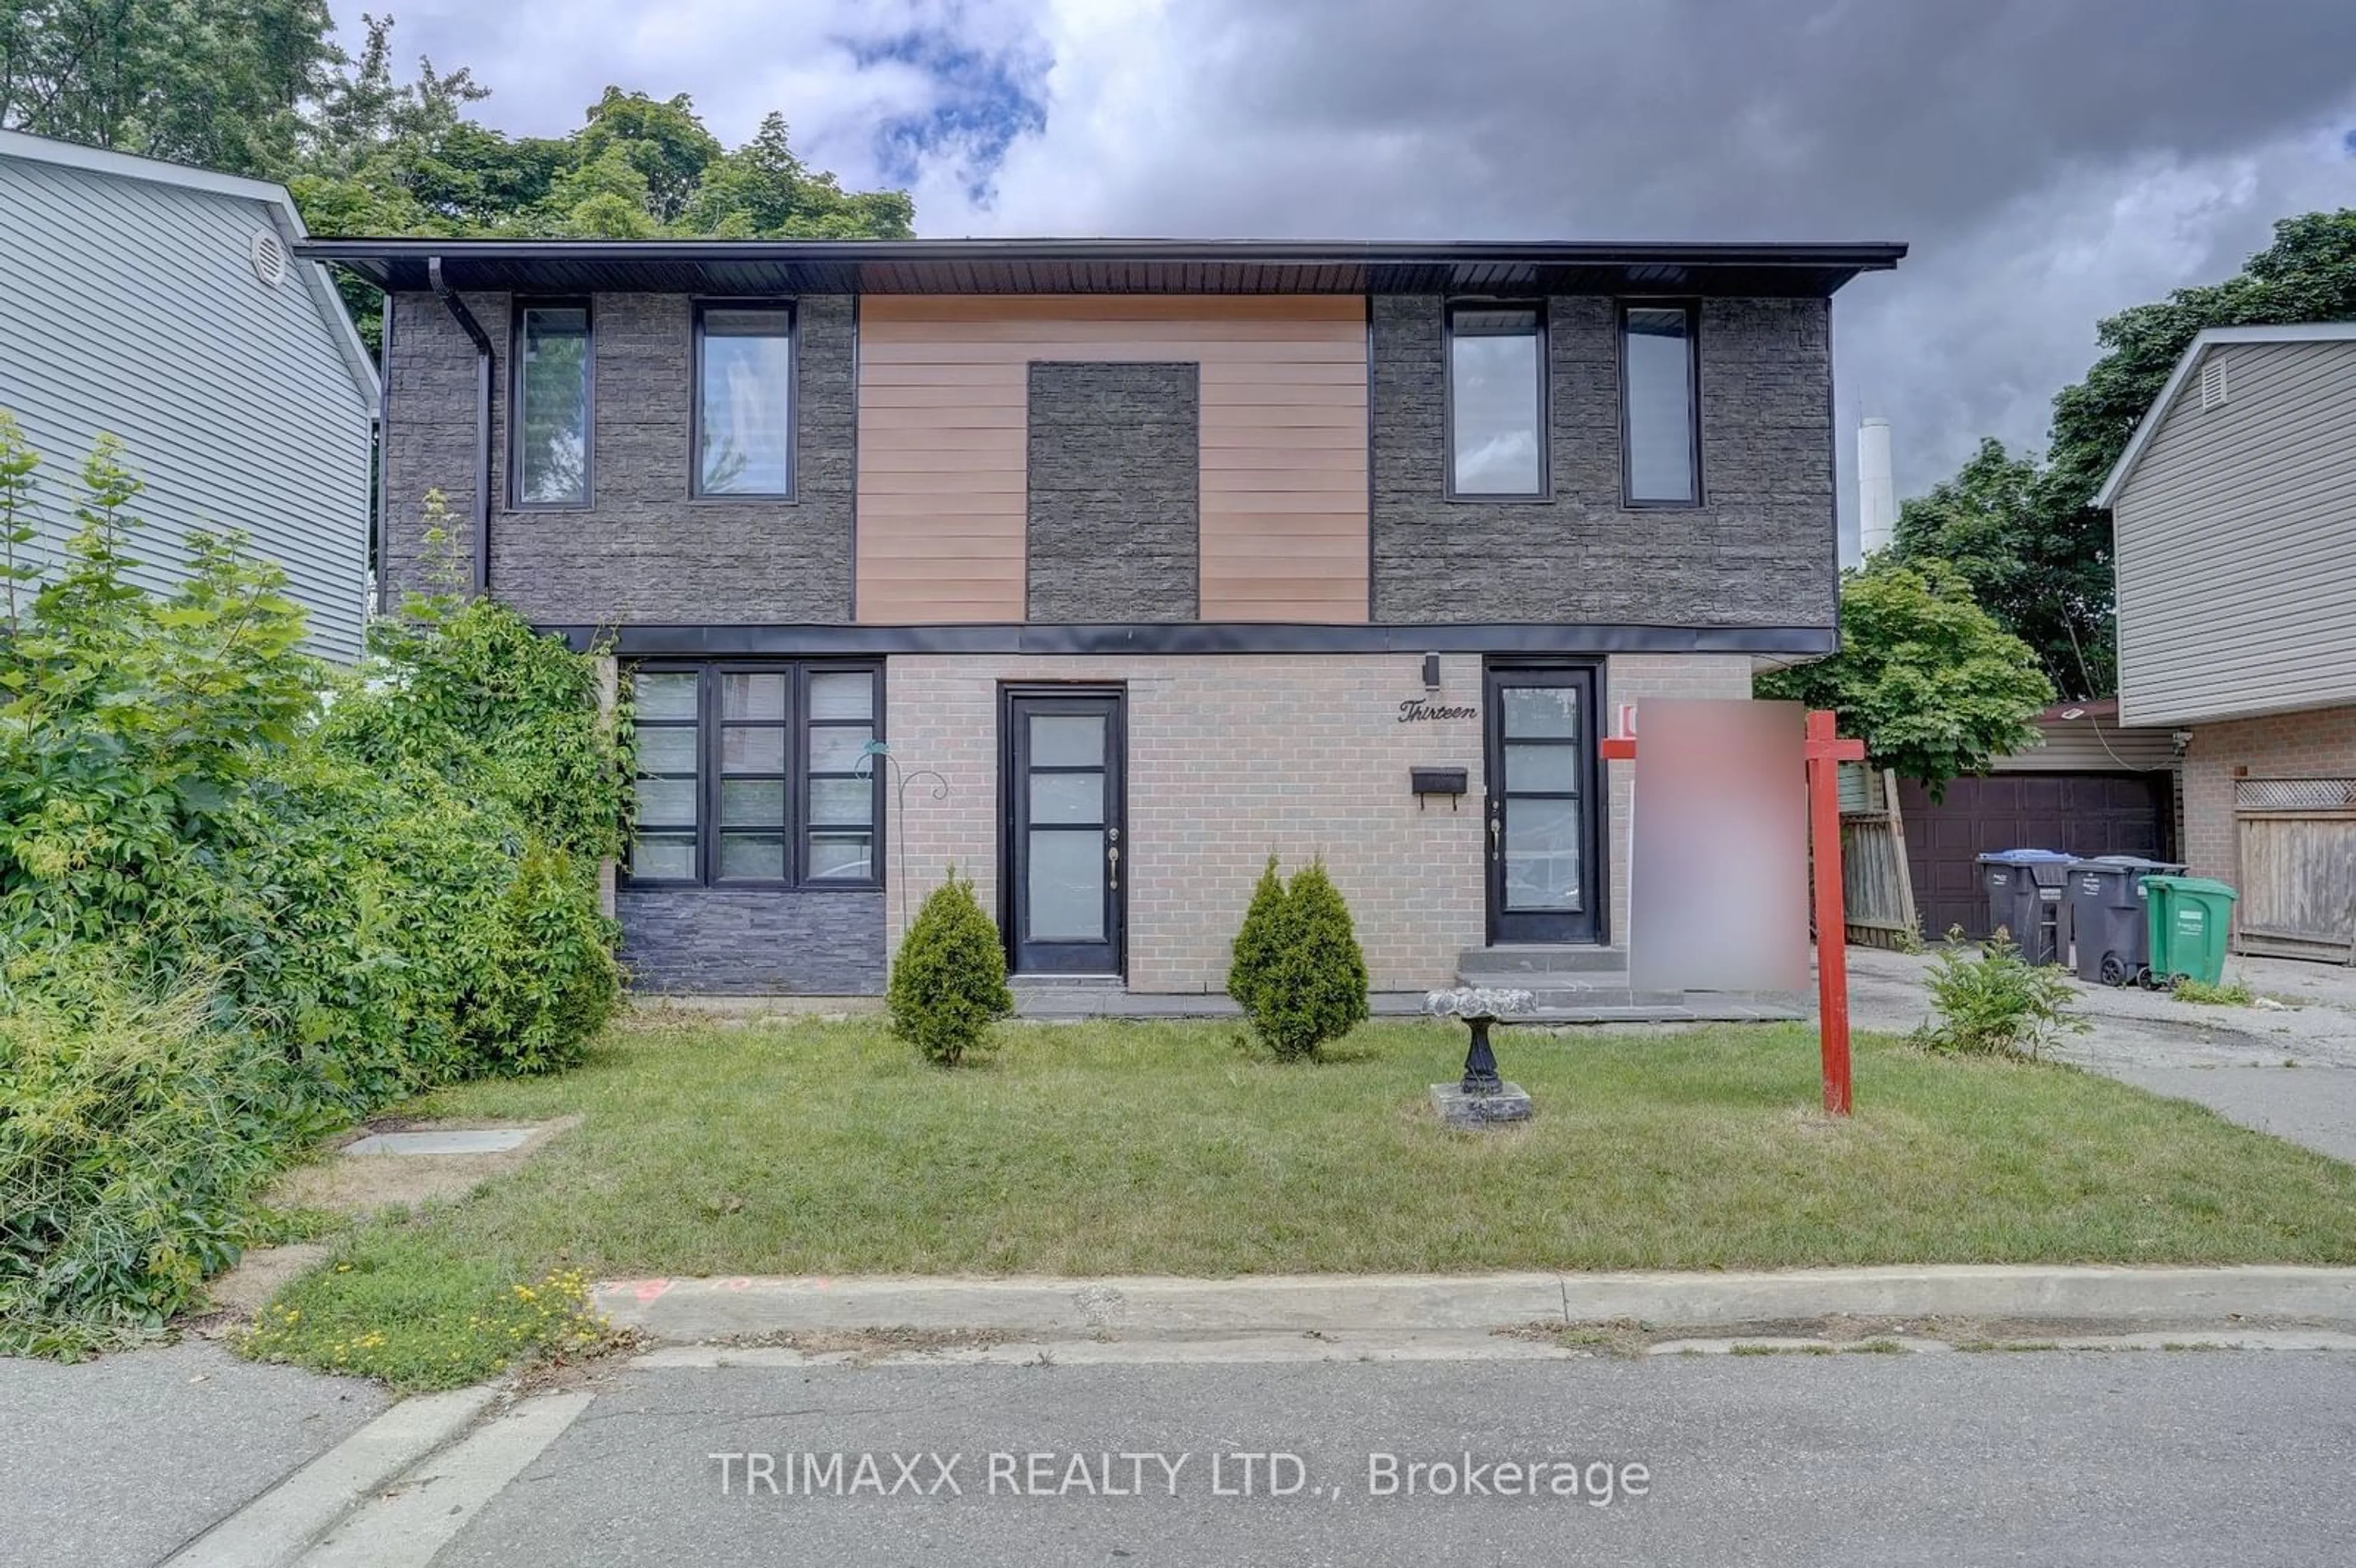 Home with brick exterior material for 13 Havendale Crt, Brampton Ontario L6S 2B5